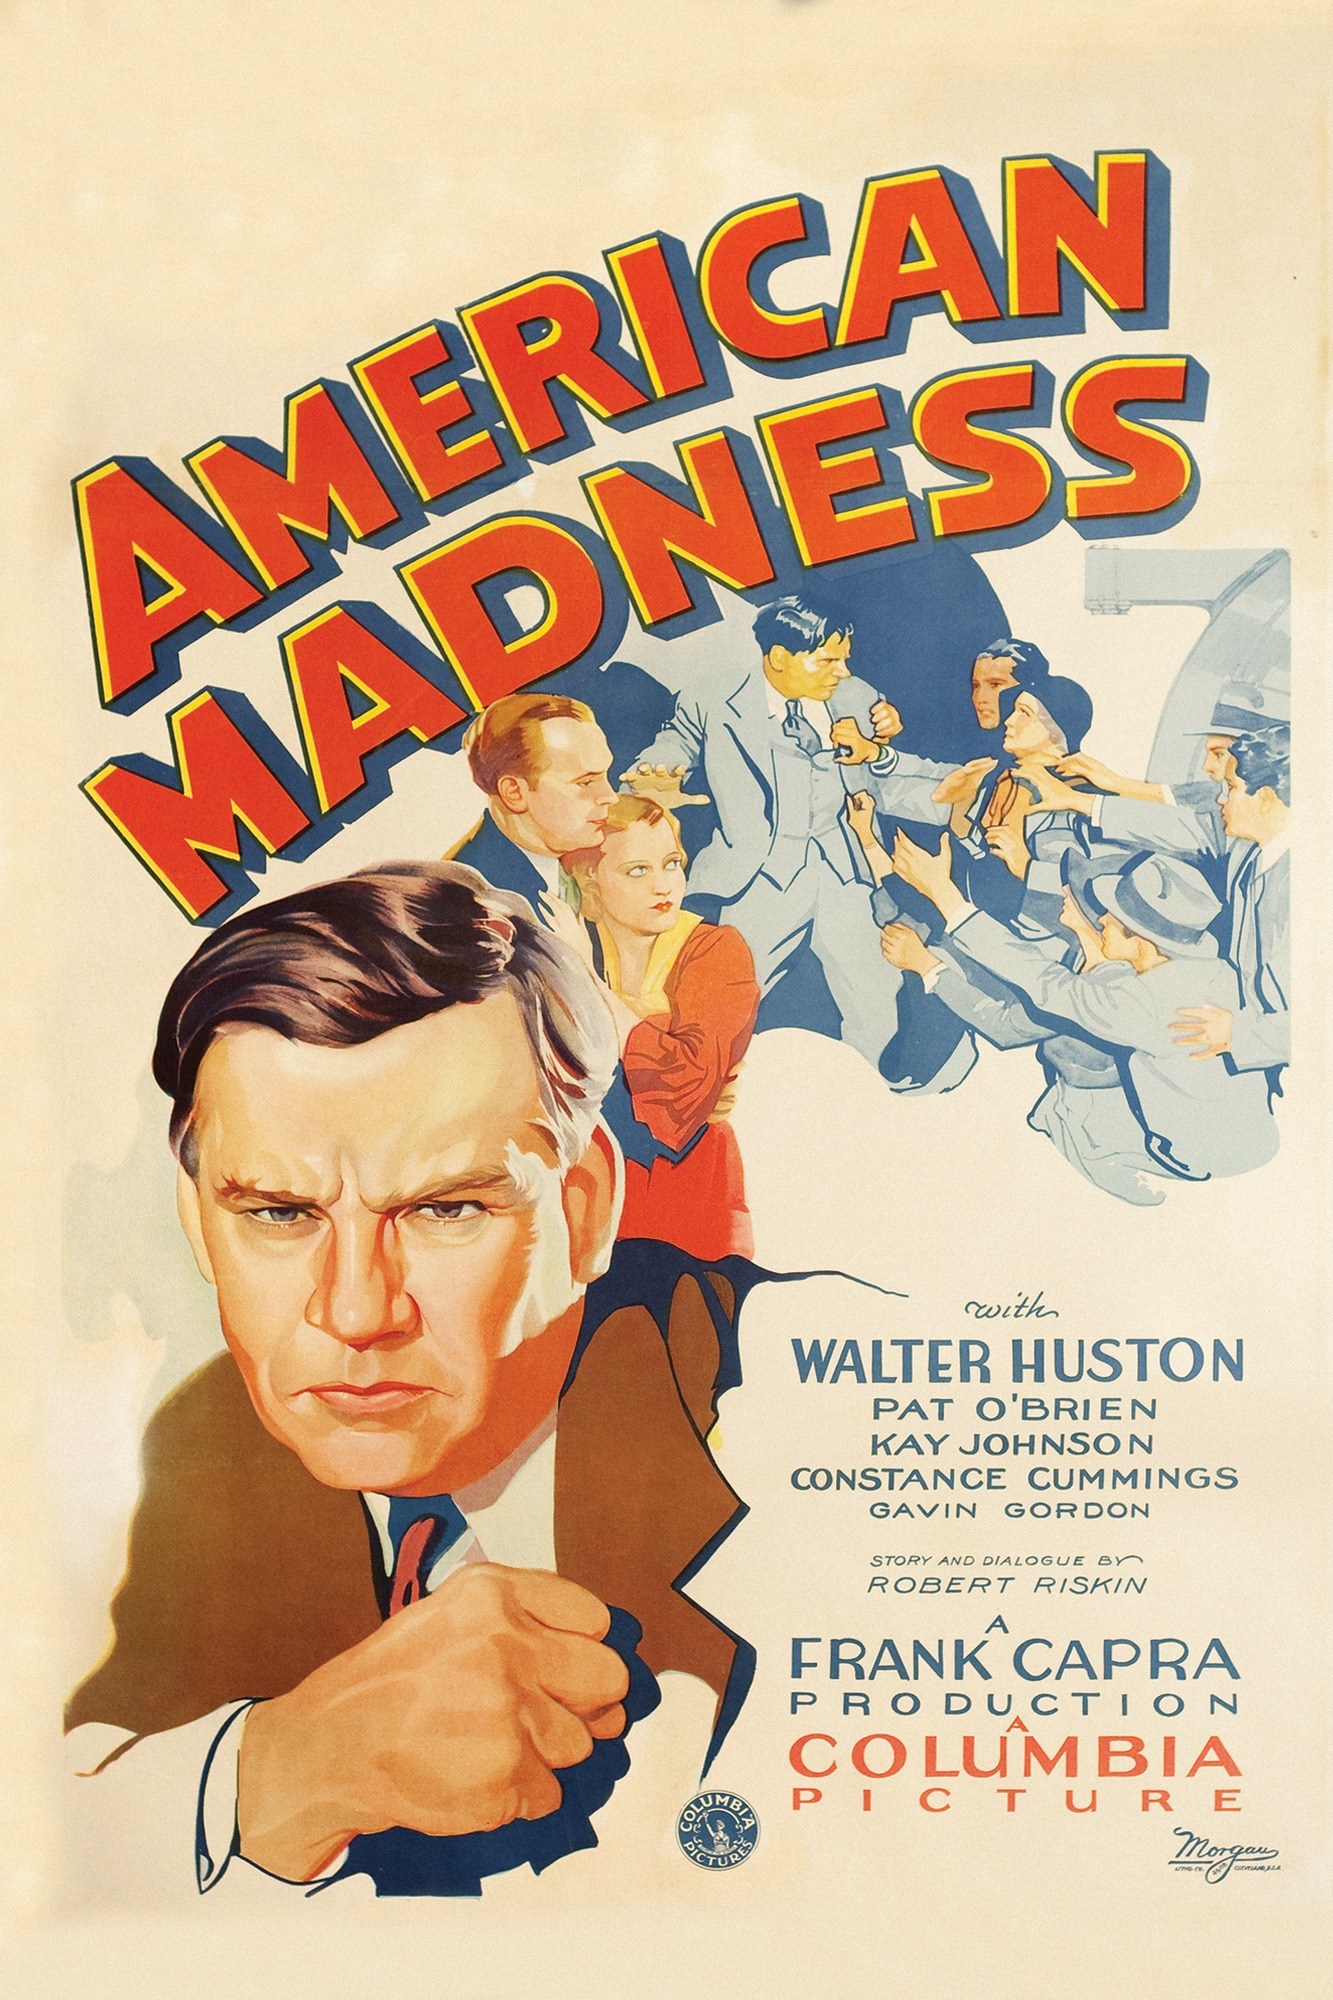 American Madness poster